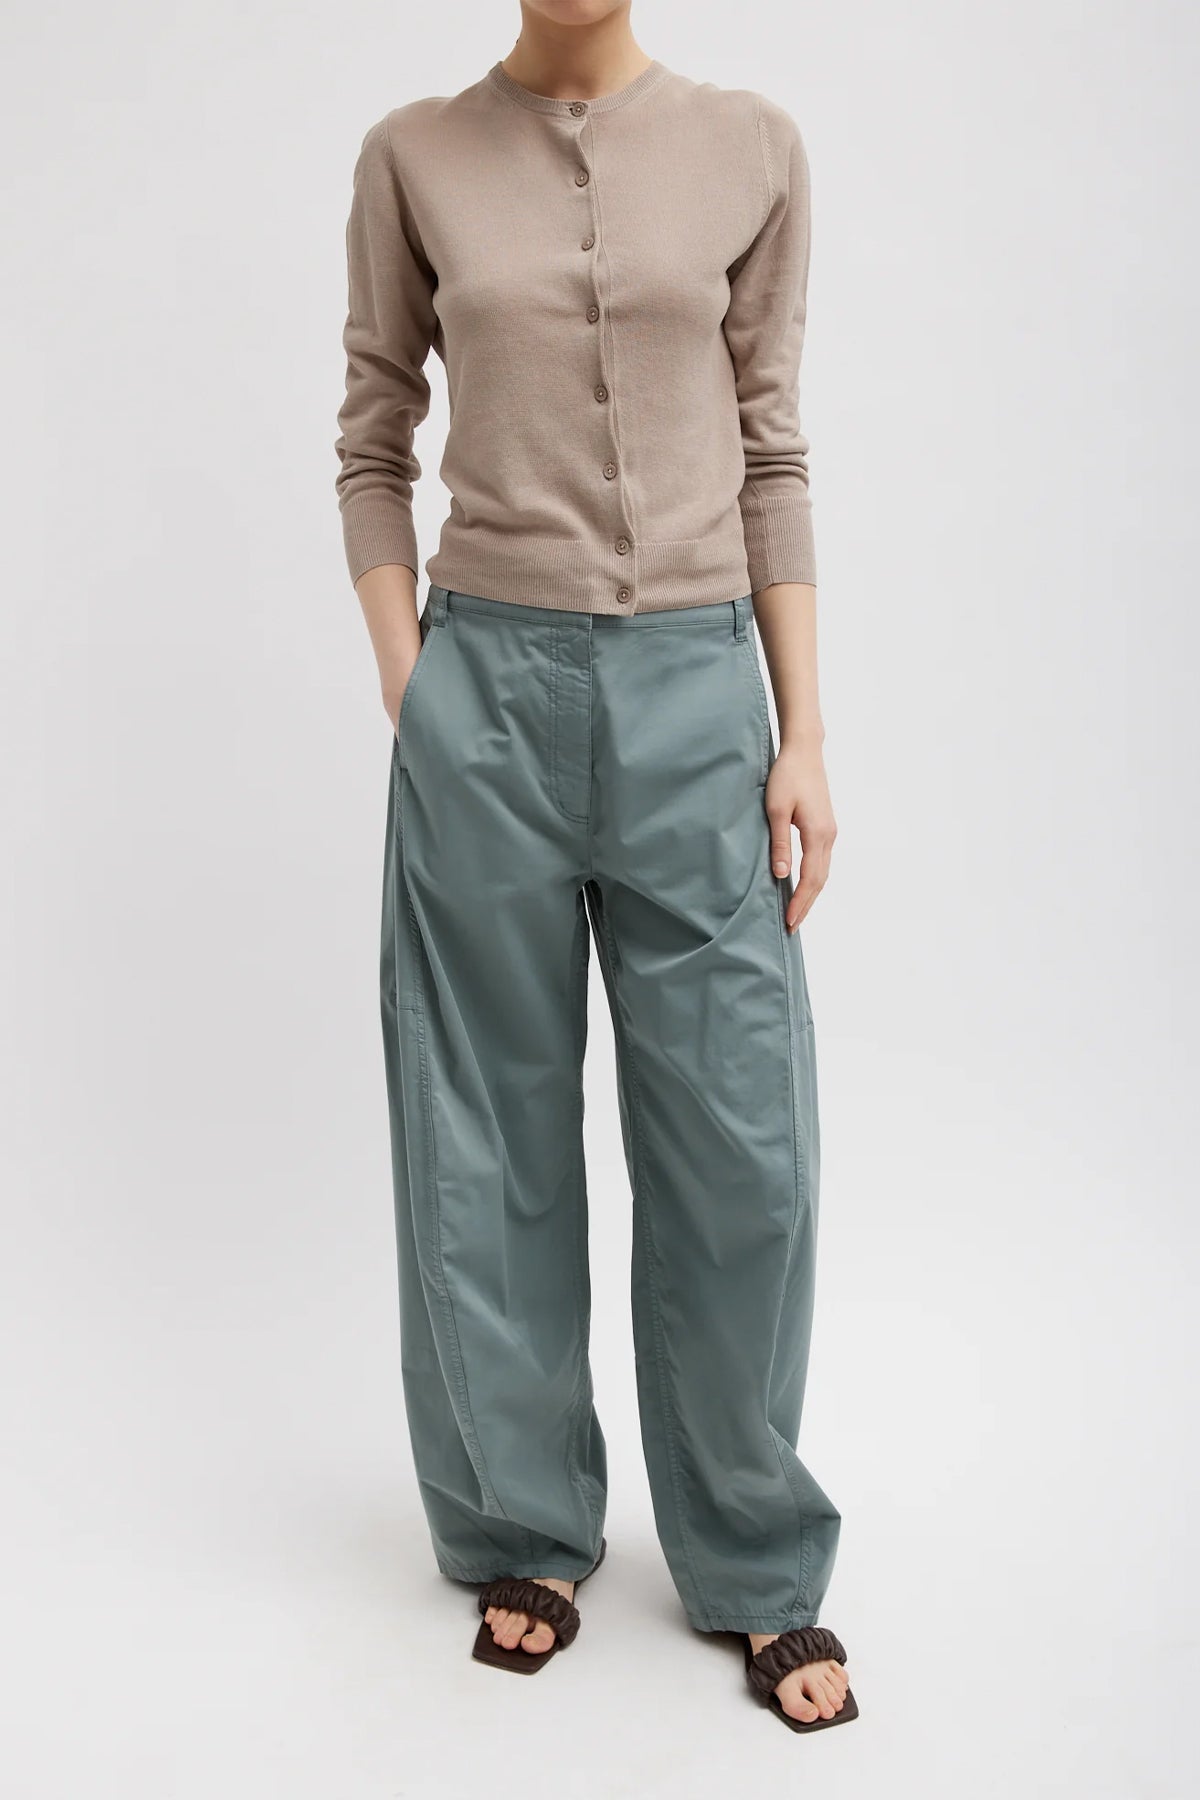 Garment Dyed Silky Cotton Sid Pant in Green Limestone - shop-olivia.com